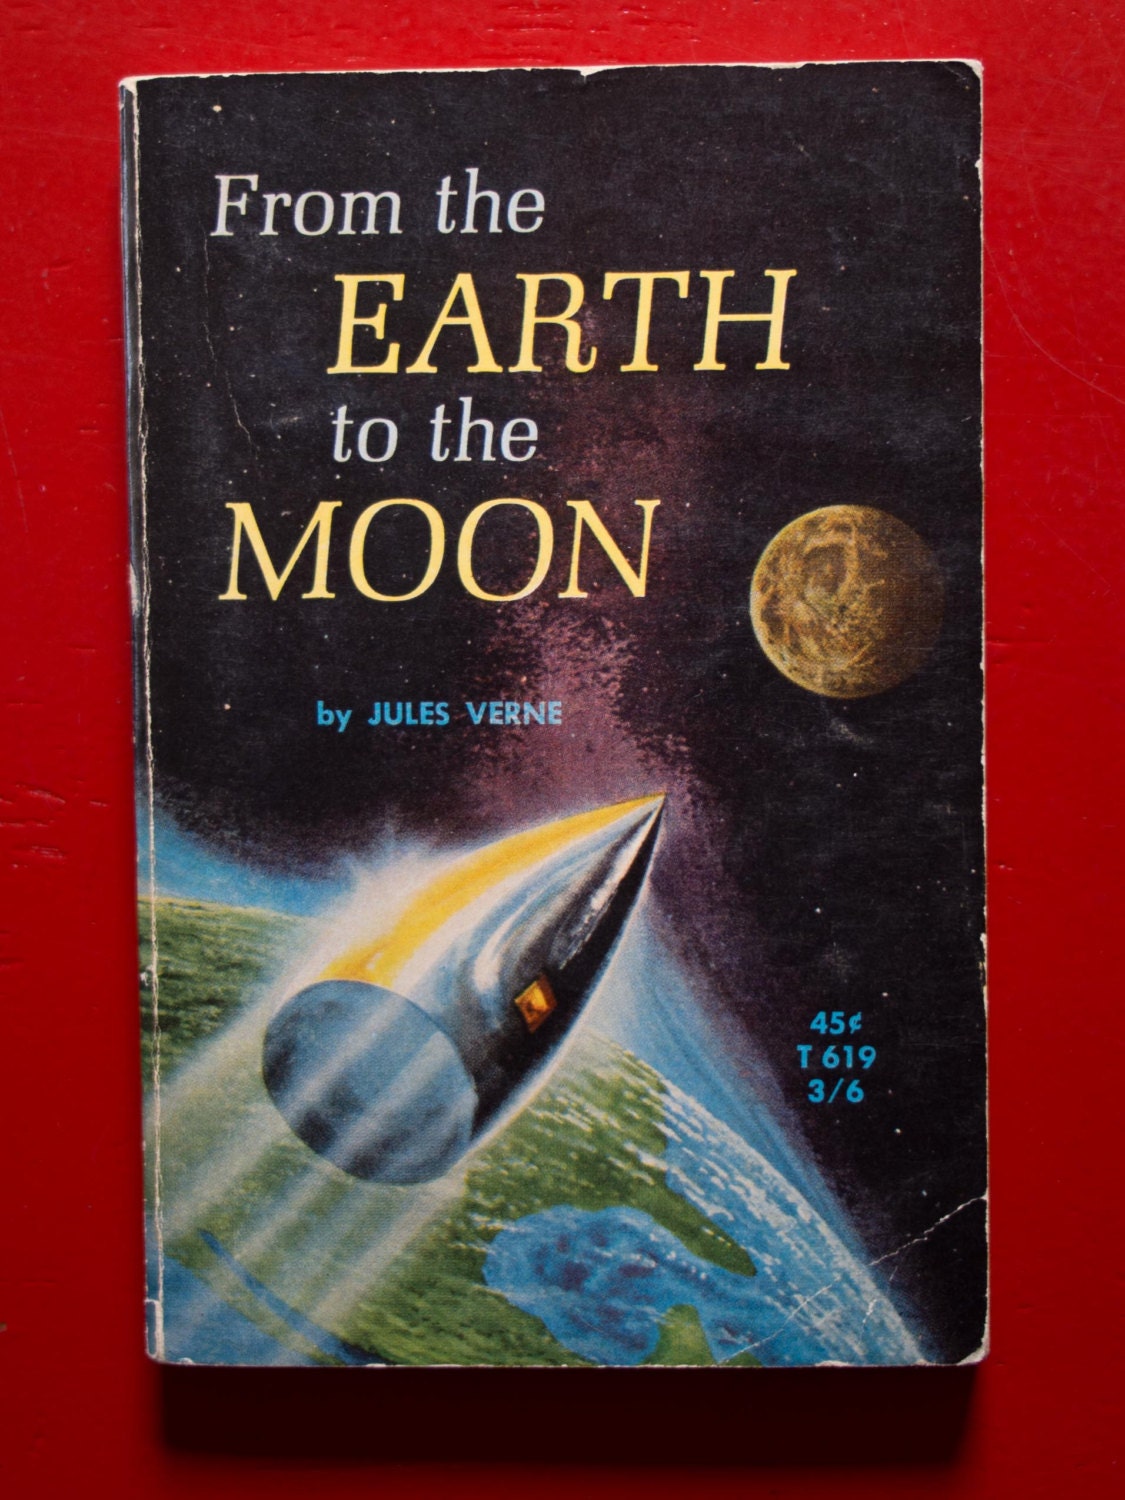 jules verne book from the earth to the moon